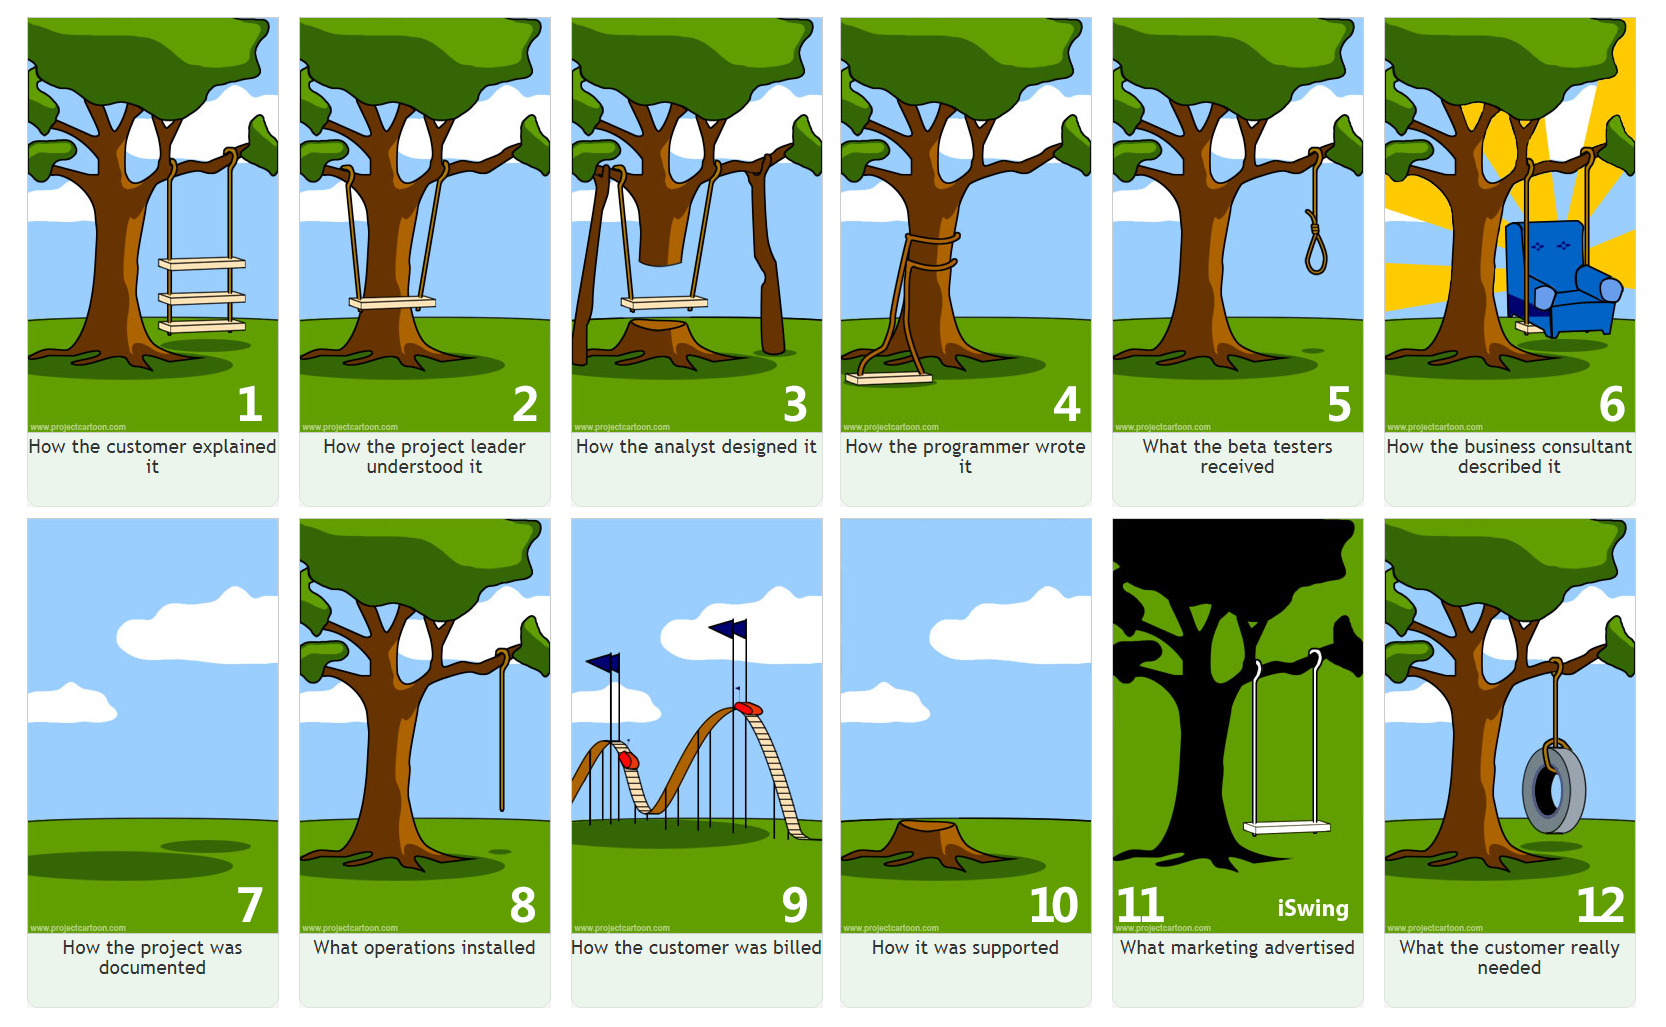 software development life cycle swing